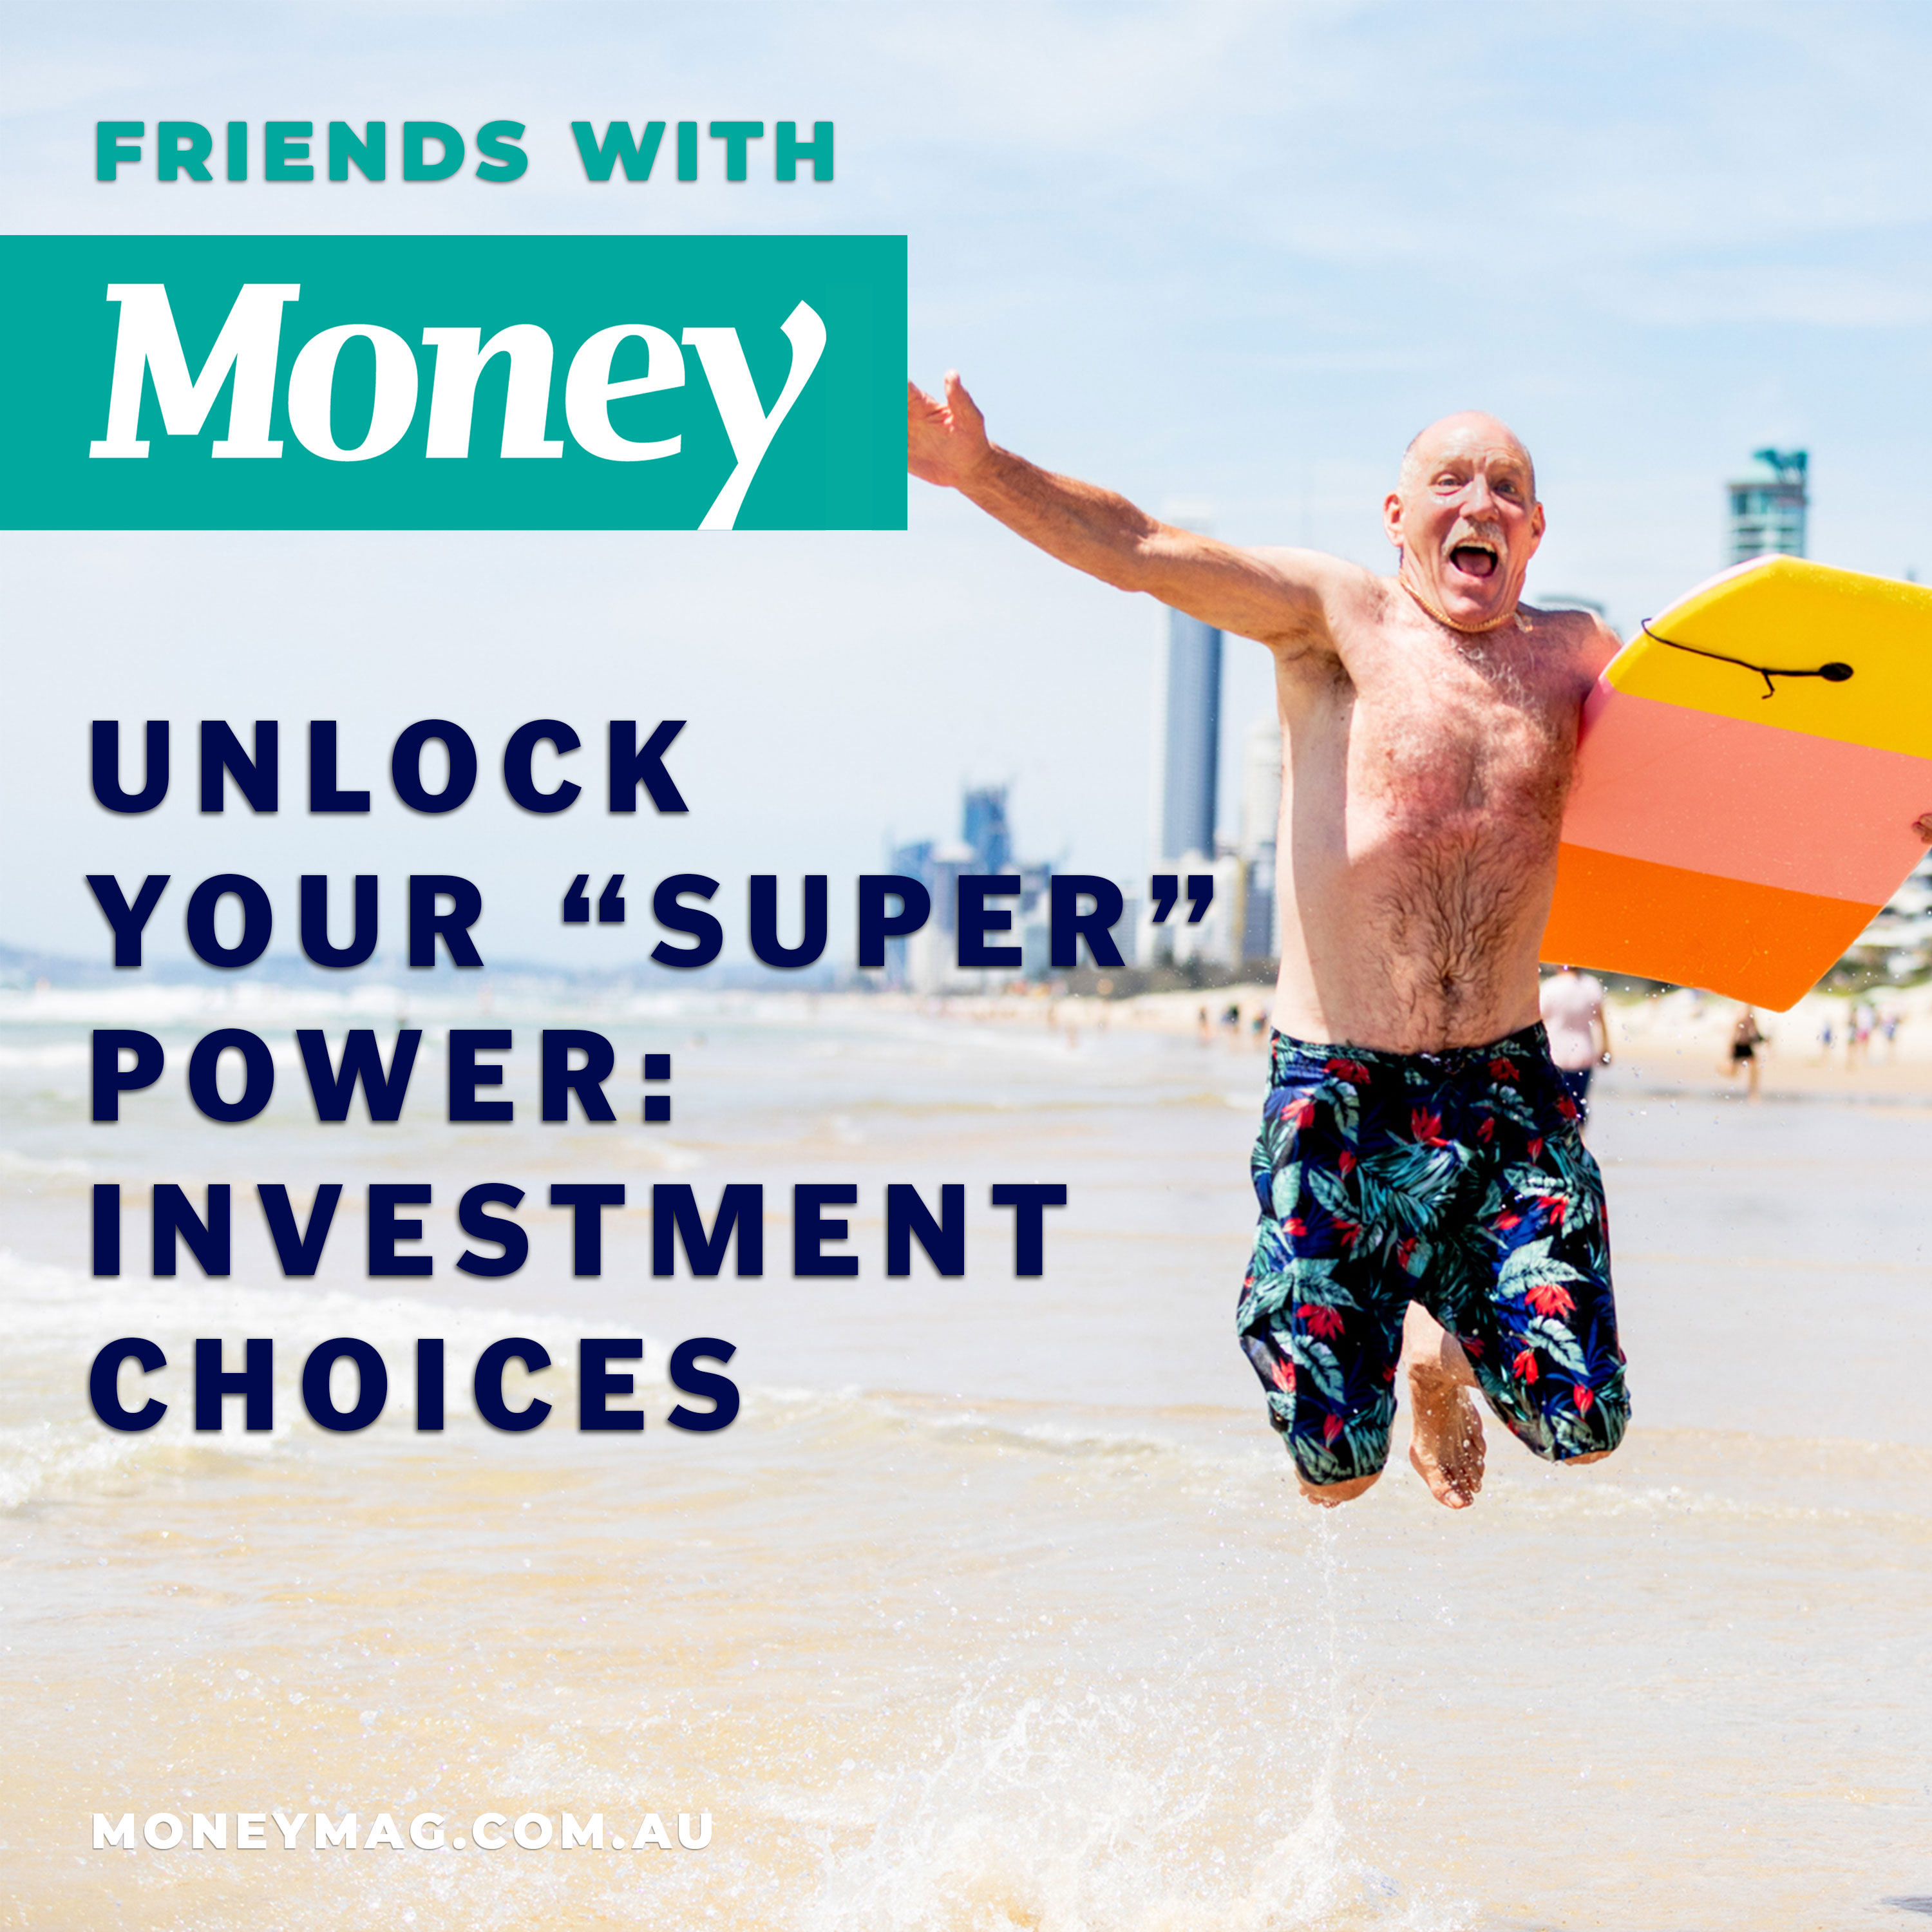 Unlock your ”super” power: Investment choices